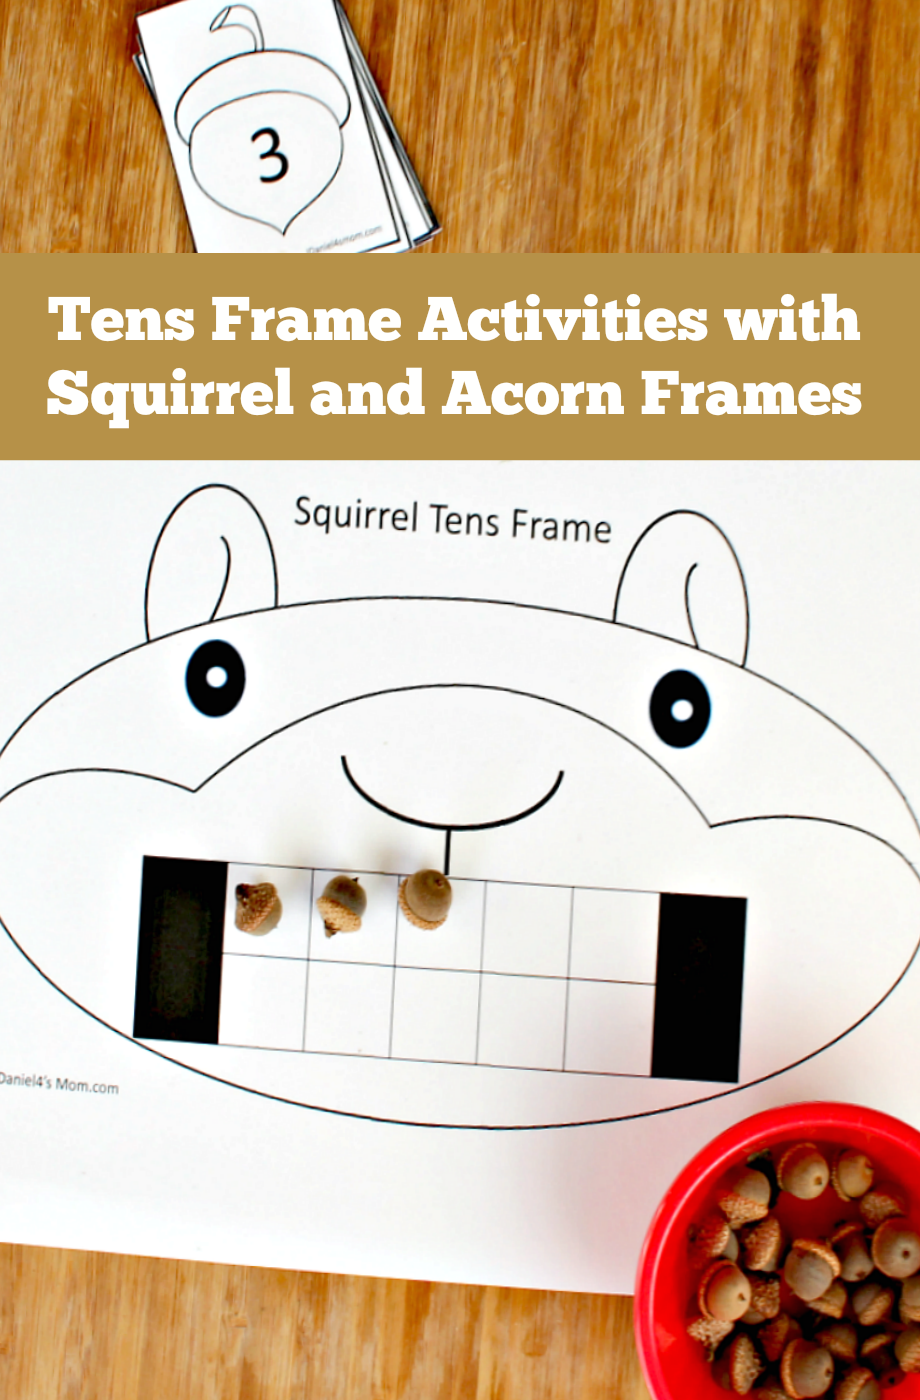 Ten Frame Activities with Squirrel and Acorn Frames - This set of activities was designed to go along with the book Scaredy Squirrel. It is includes a math counting activity.